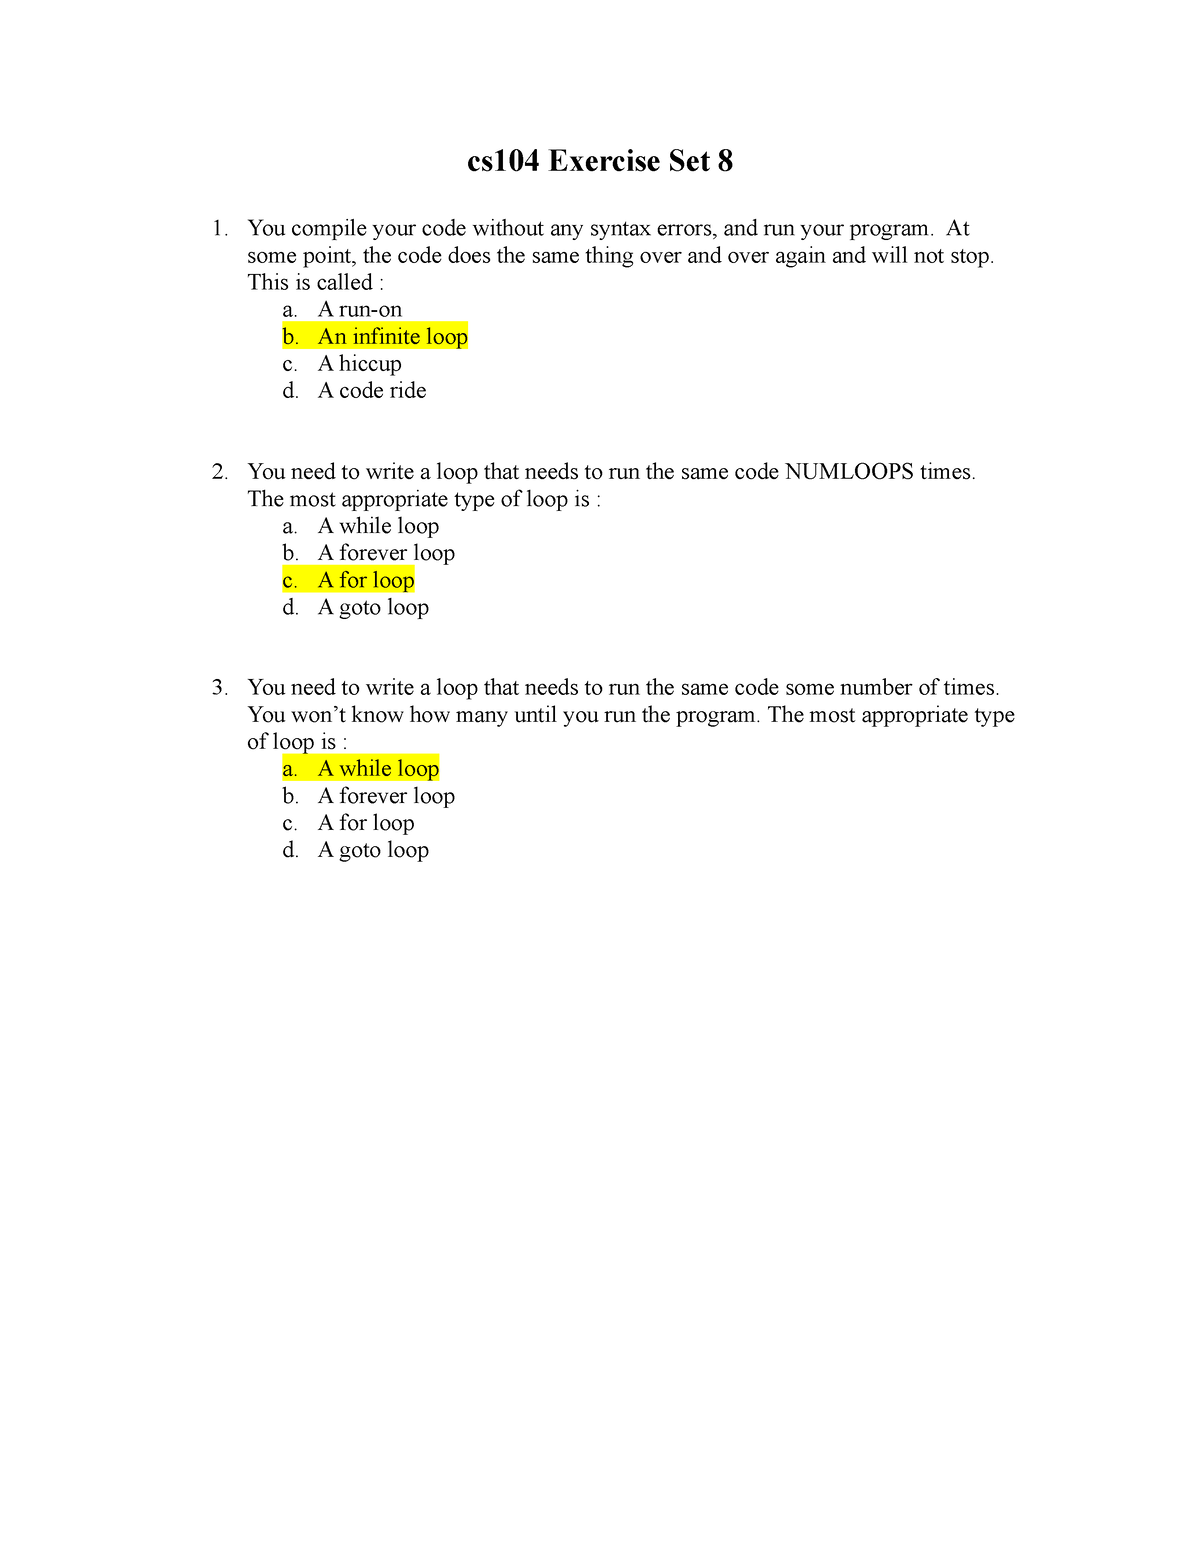 corrective assignment 8.1 answer key